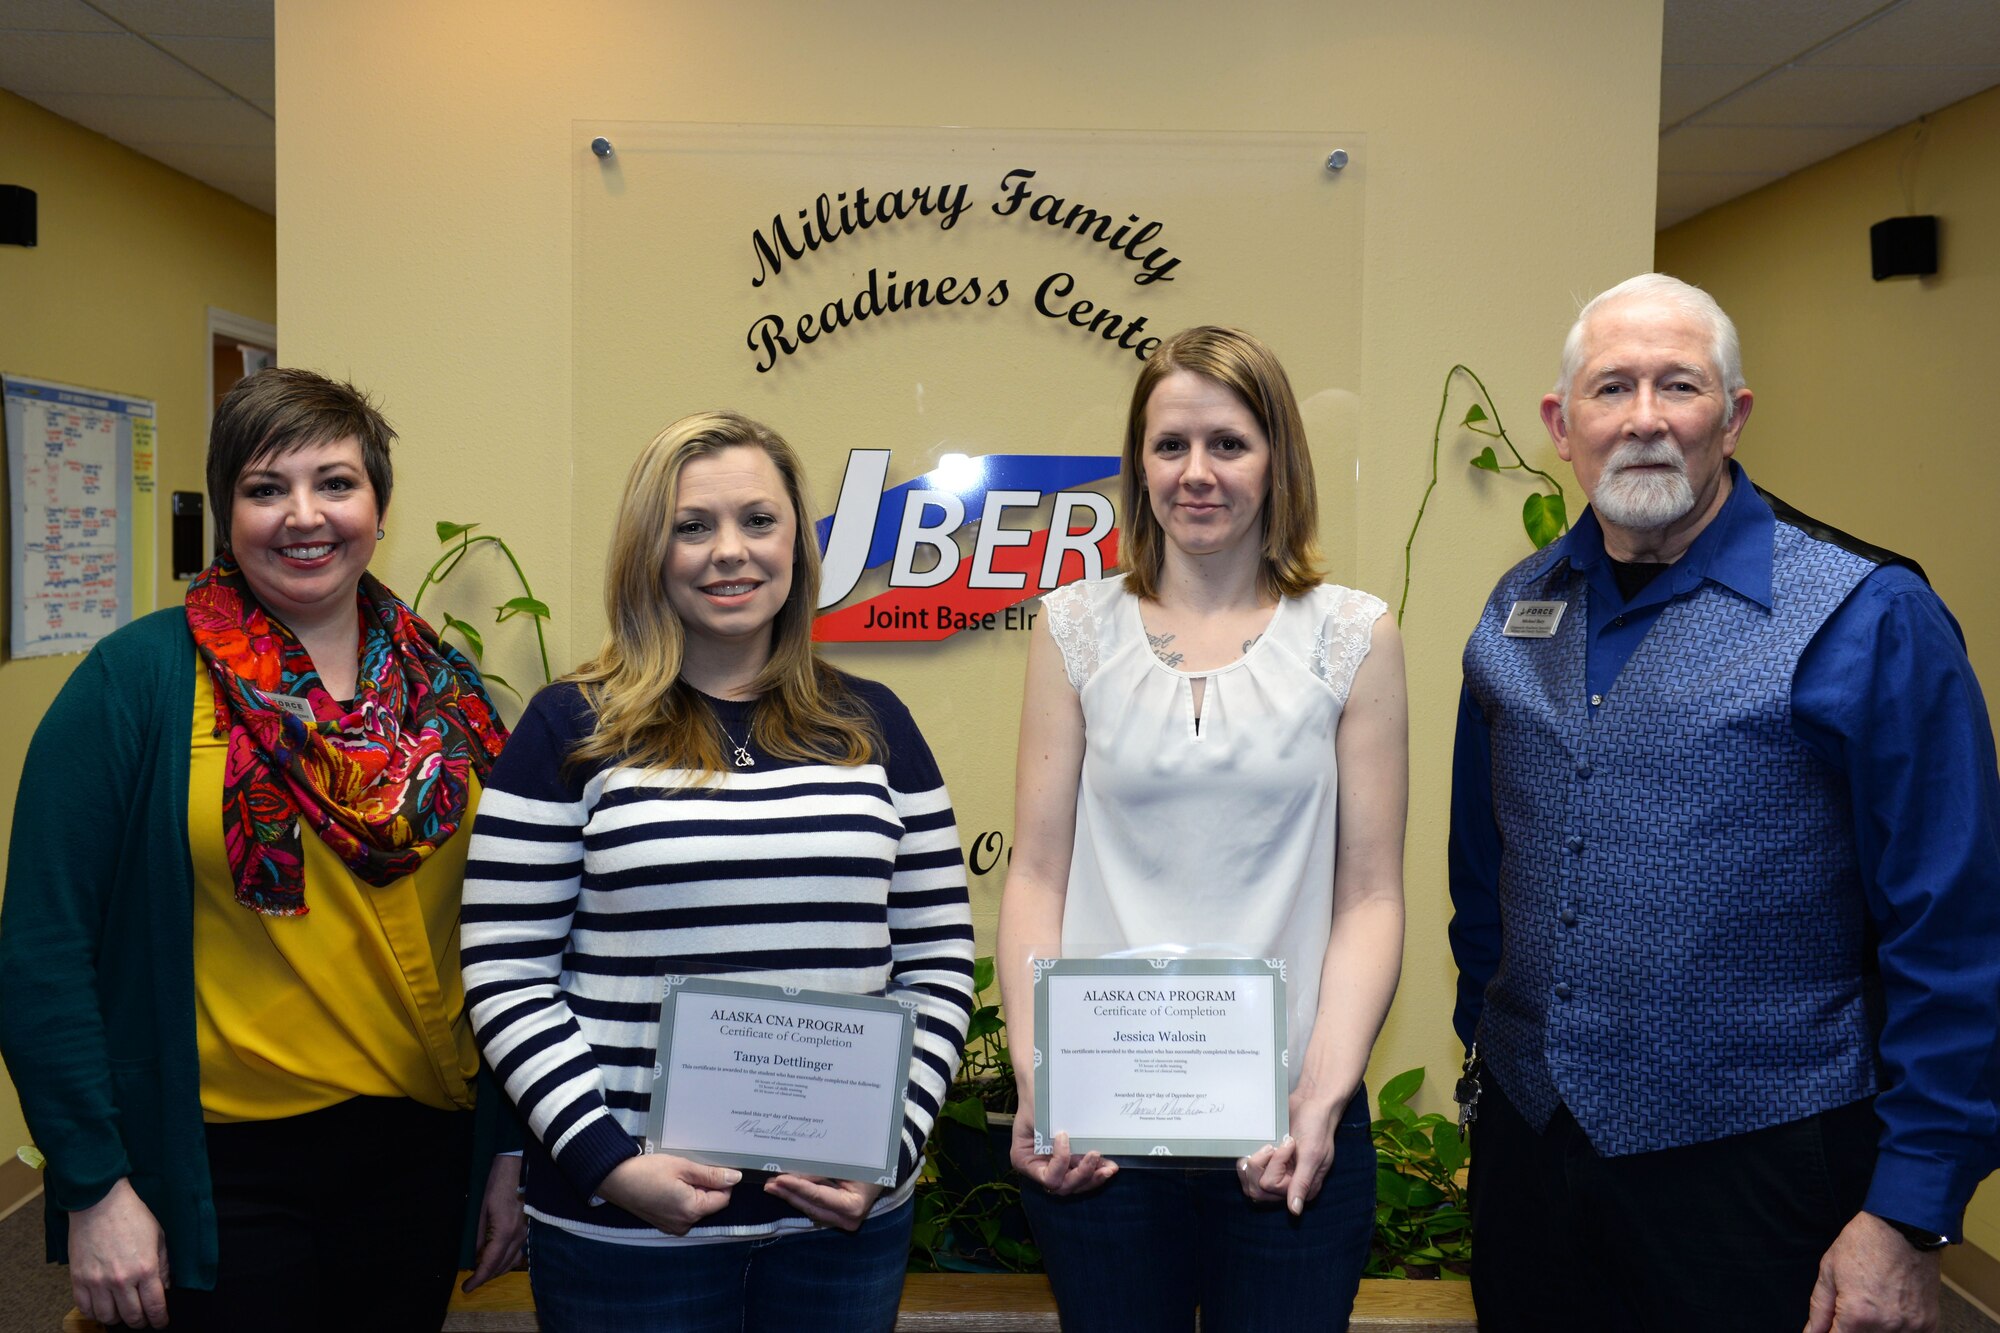 Christie Rodriguez, employment readiness program manager and Michael Baty, a community readiness specialist from the Military & Family Readiness Center, stand with Air Force Aid Society Spouse Employment Program scholarship recipients, Tanya Dettlinger and Jessica Walosin, at Joint Base Elmendorf-Richardson, Alaska, Jan. 30, 2018. The MFRC at JBER annually searches and applies for scholarships and grants to provide military spouses with new employment opportunities.